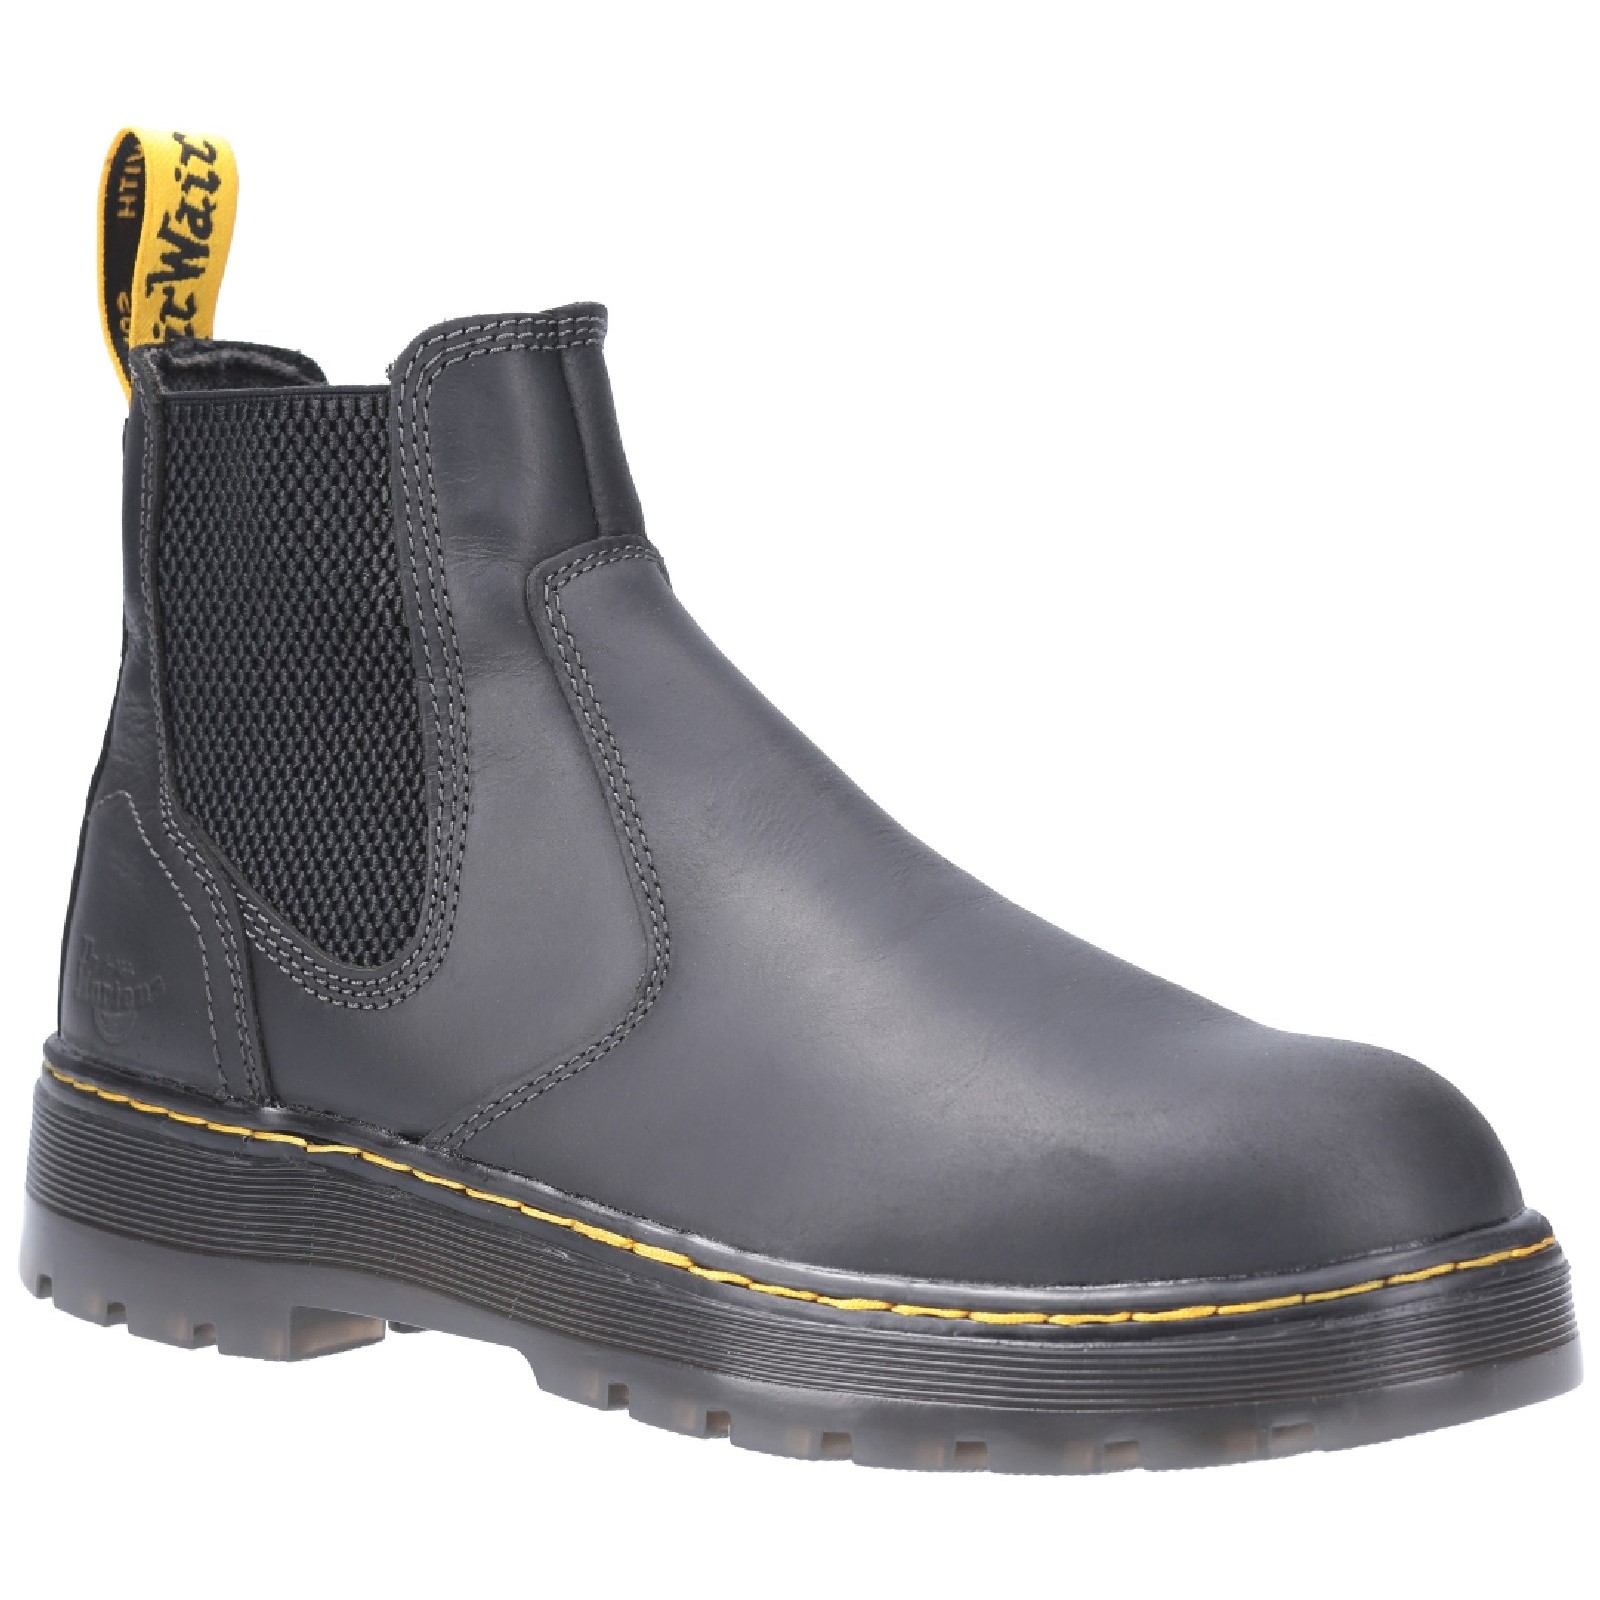 Eaves SB Elasticated Safety Boot